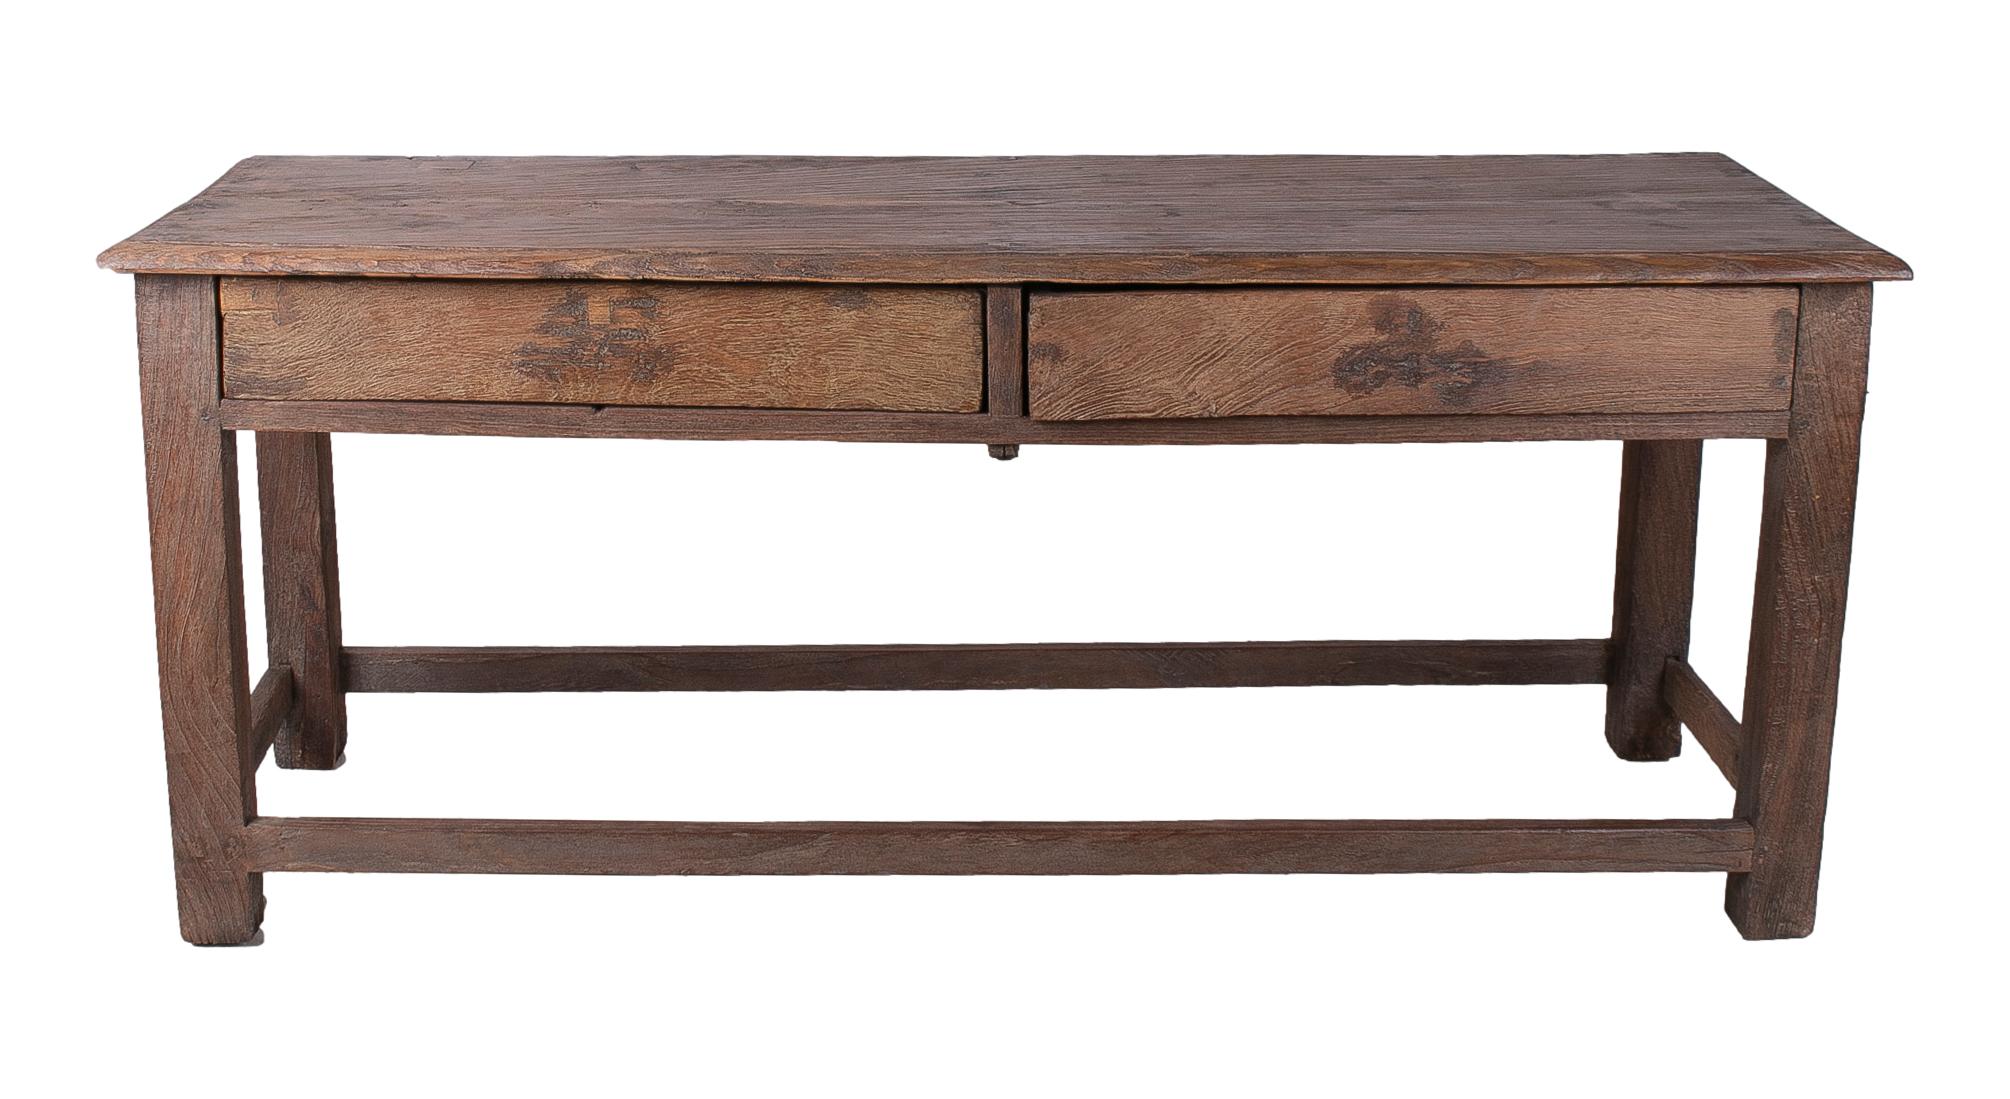 1970s Spanish industrial wooden 2-drawer table with crossbeam legs.